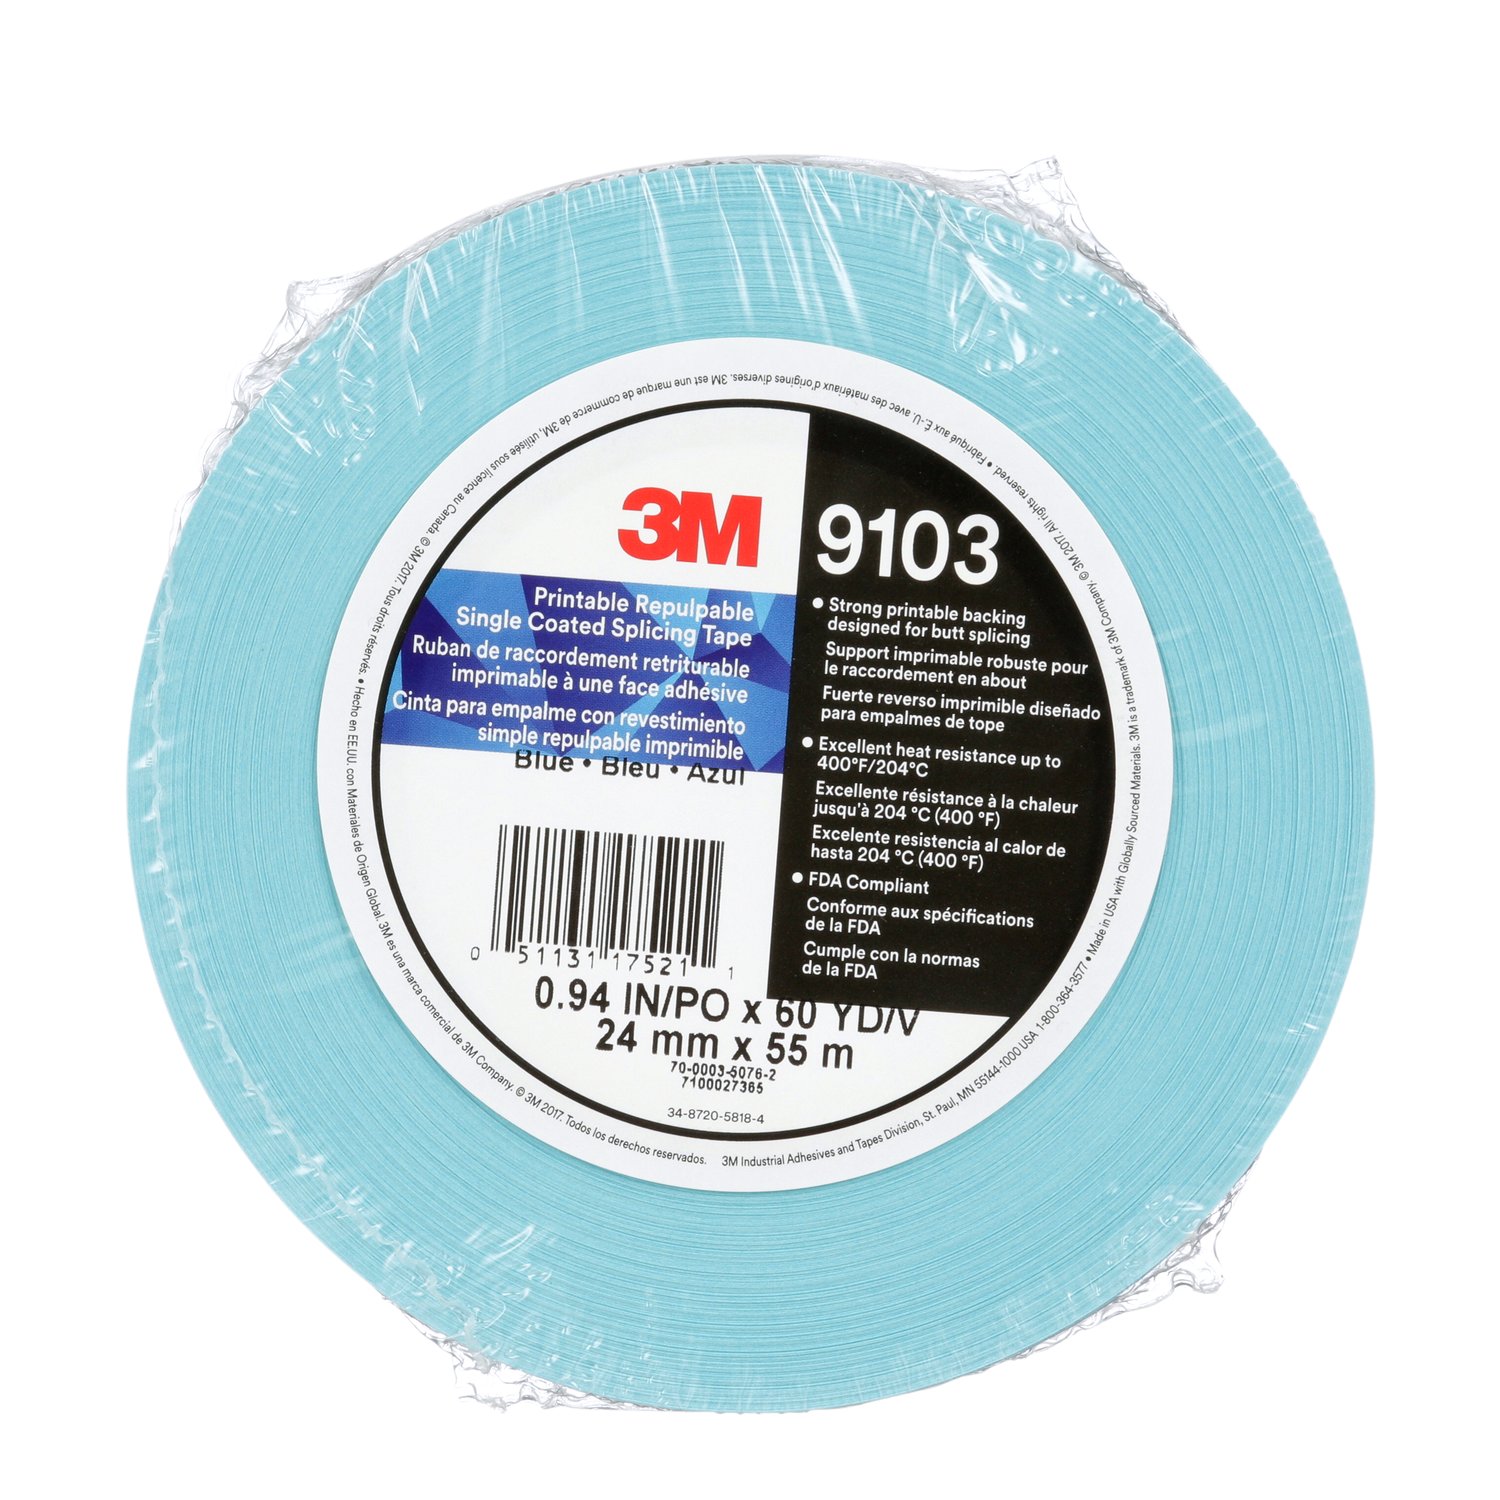 7100027365 - 3M Printable Repulpable Single Coated Splicing Tape 9103, Blue, 24 mm x
55 m, 4.1 mil, 36 Roll/Case